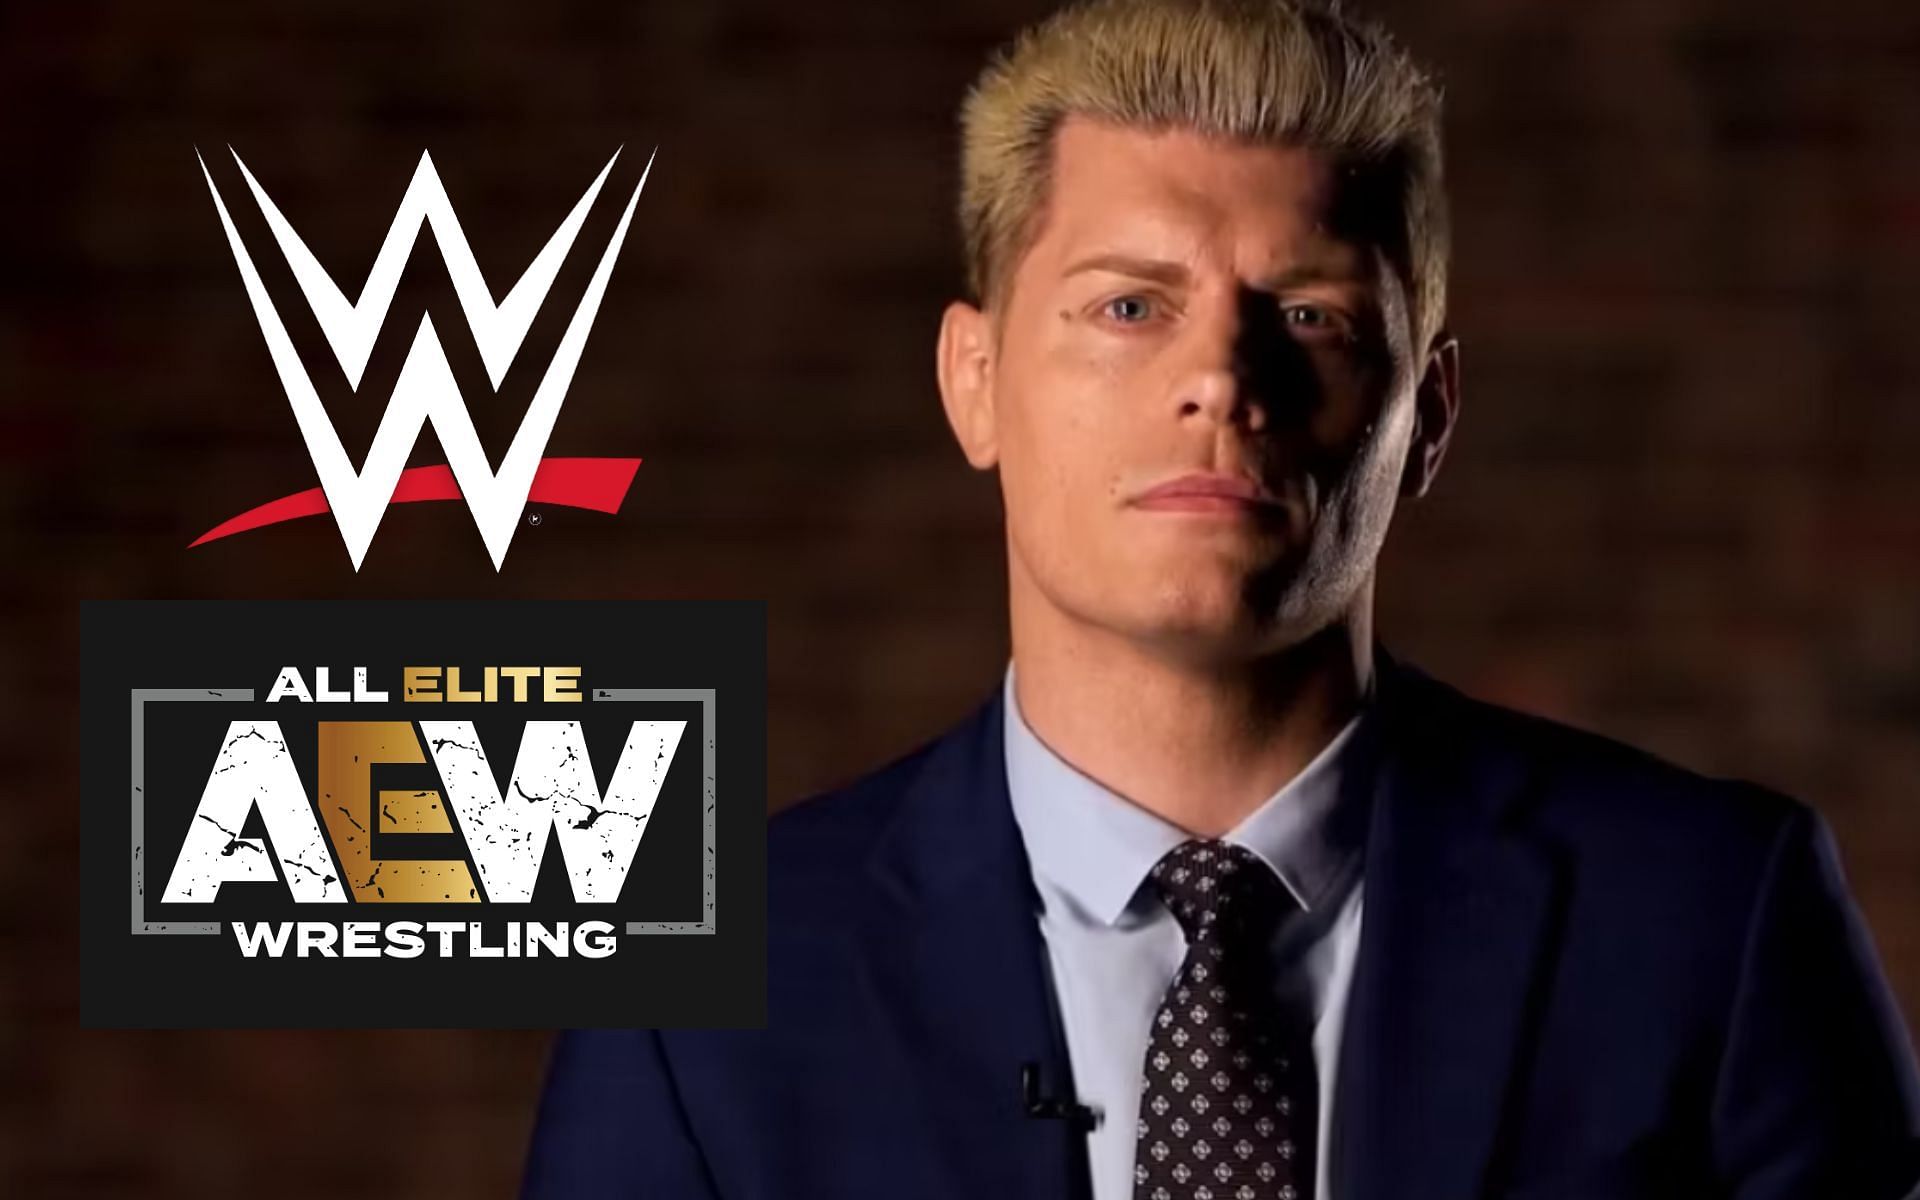 Cody Rhodes has maintained his friendship with many current AEW talents